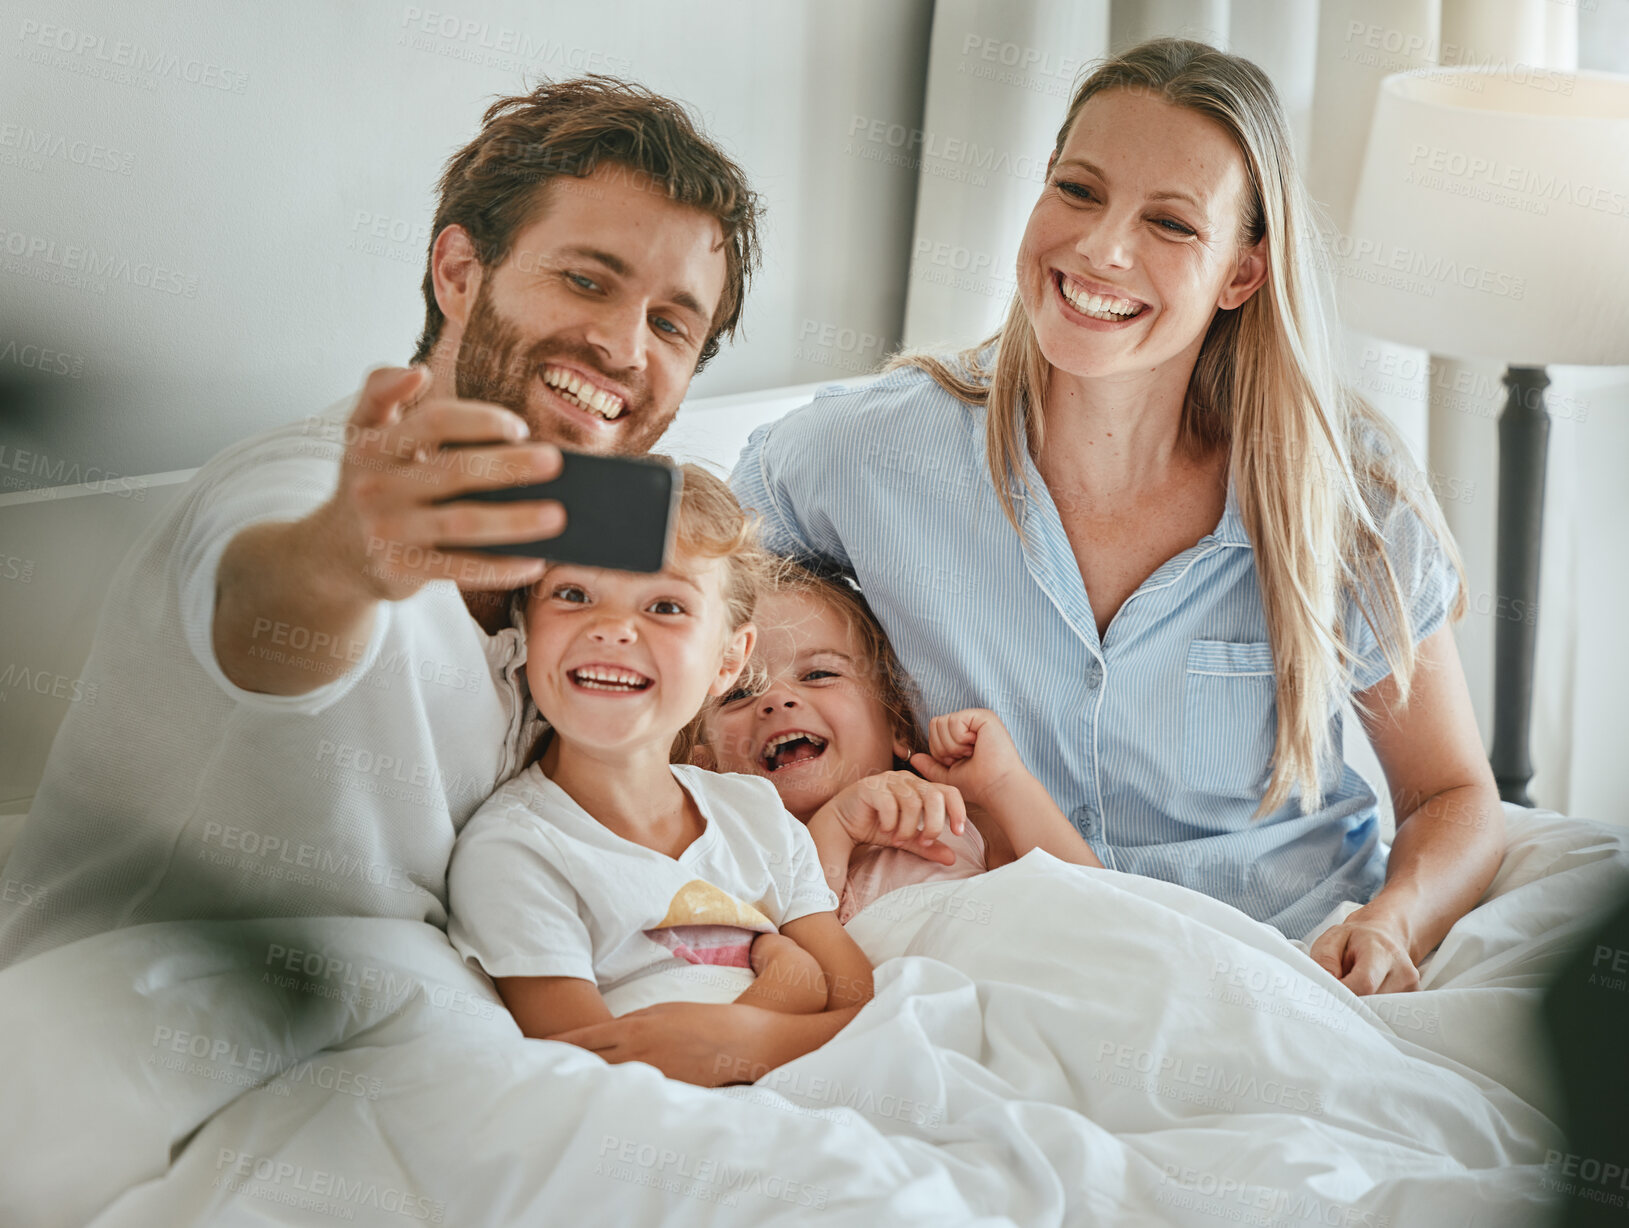 Buy stock photo Phone selfie, family and relax in bed together bonding, smiling for mobile photograph for social media. Happy parents, excited smiling children and digital tech smartphone in bedroom at home